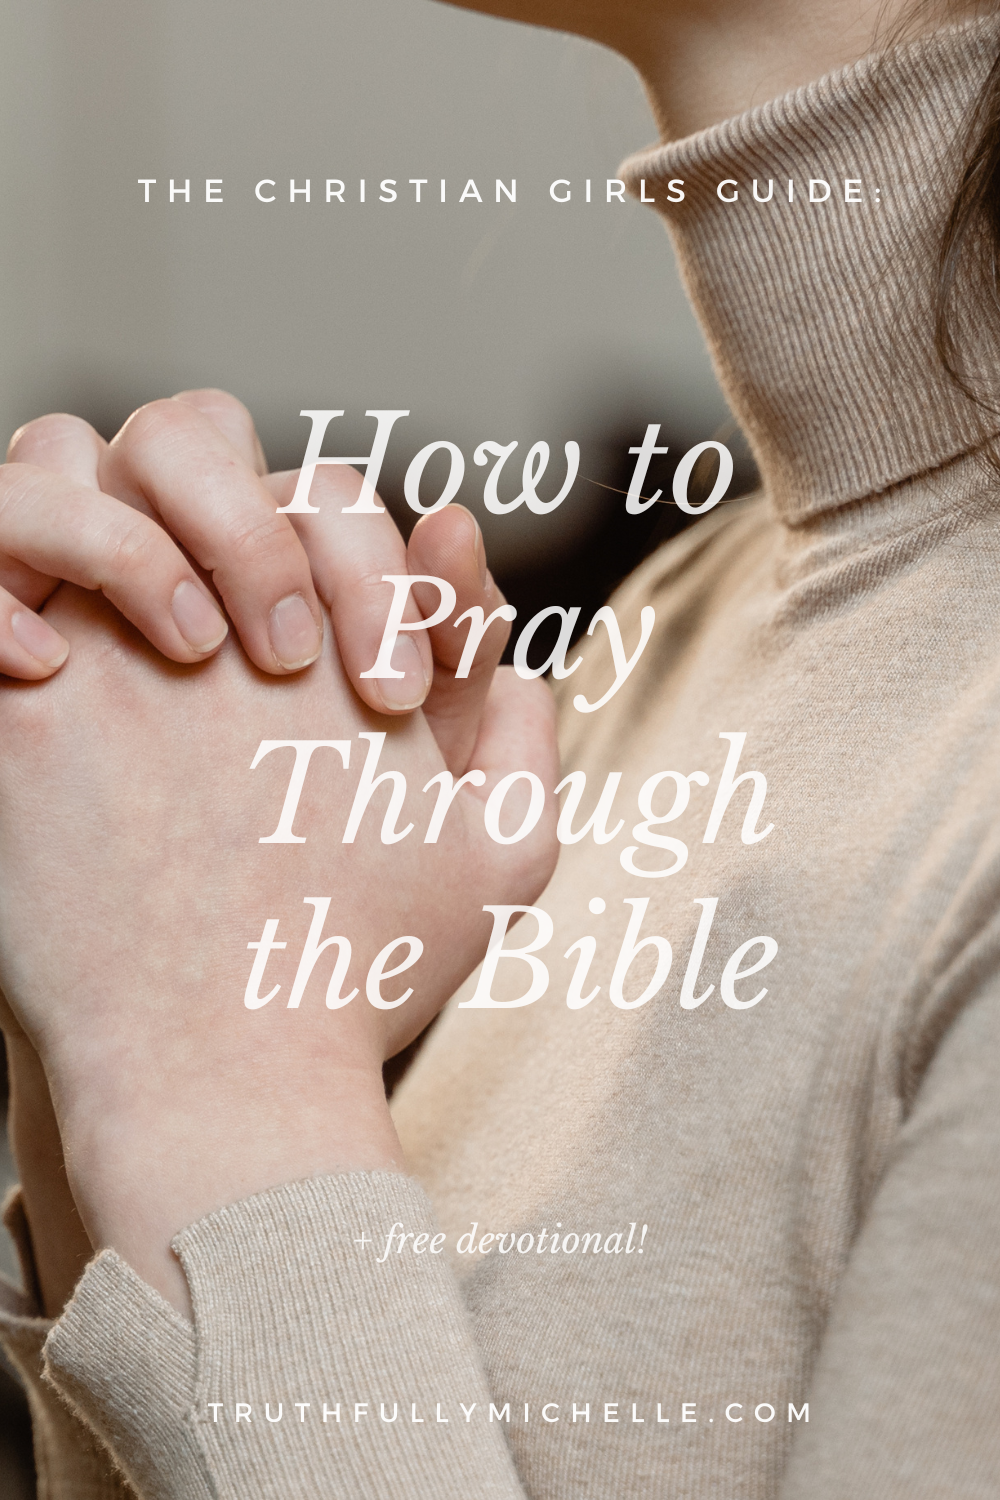 praying the scriptures, how to pray scripture, how to pray scriptures, how to pray the scriptures, how to pray the scriptures praying God's word, pray the scriptures, pray the word of god, praying God's word, praying scripture, praying scripture examples, praying the scriptures, praying the Word, praying the word of God